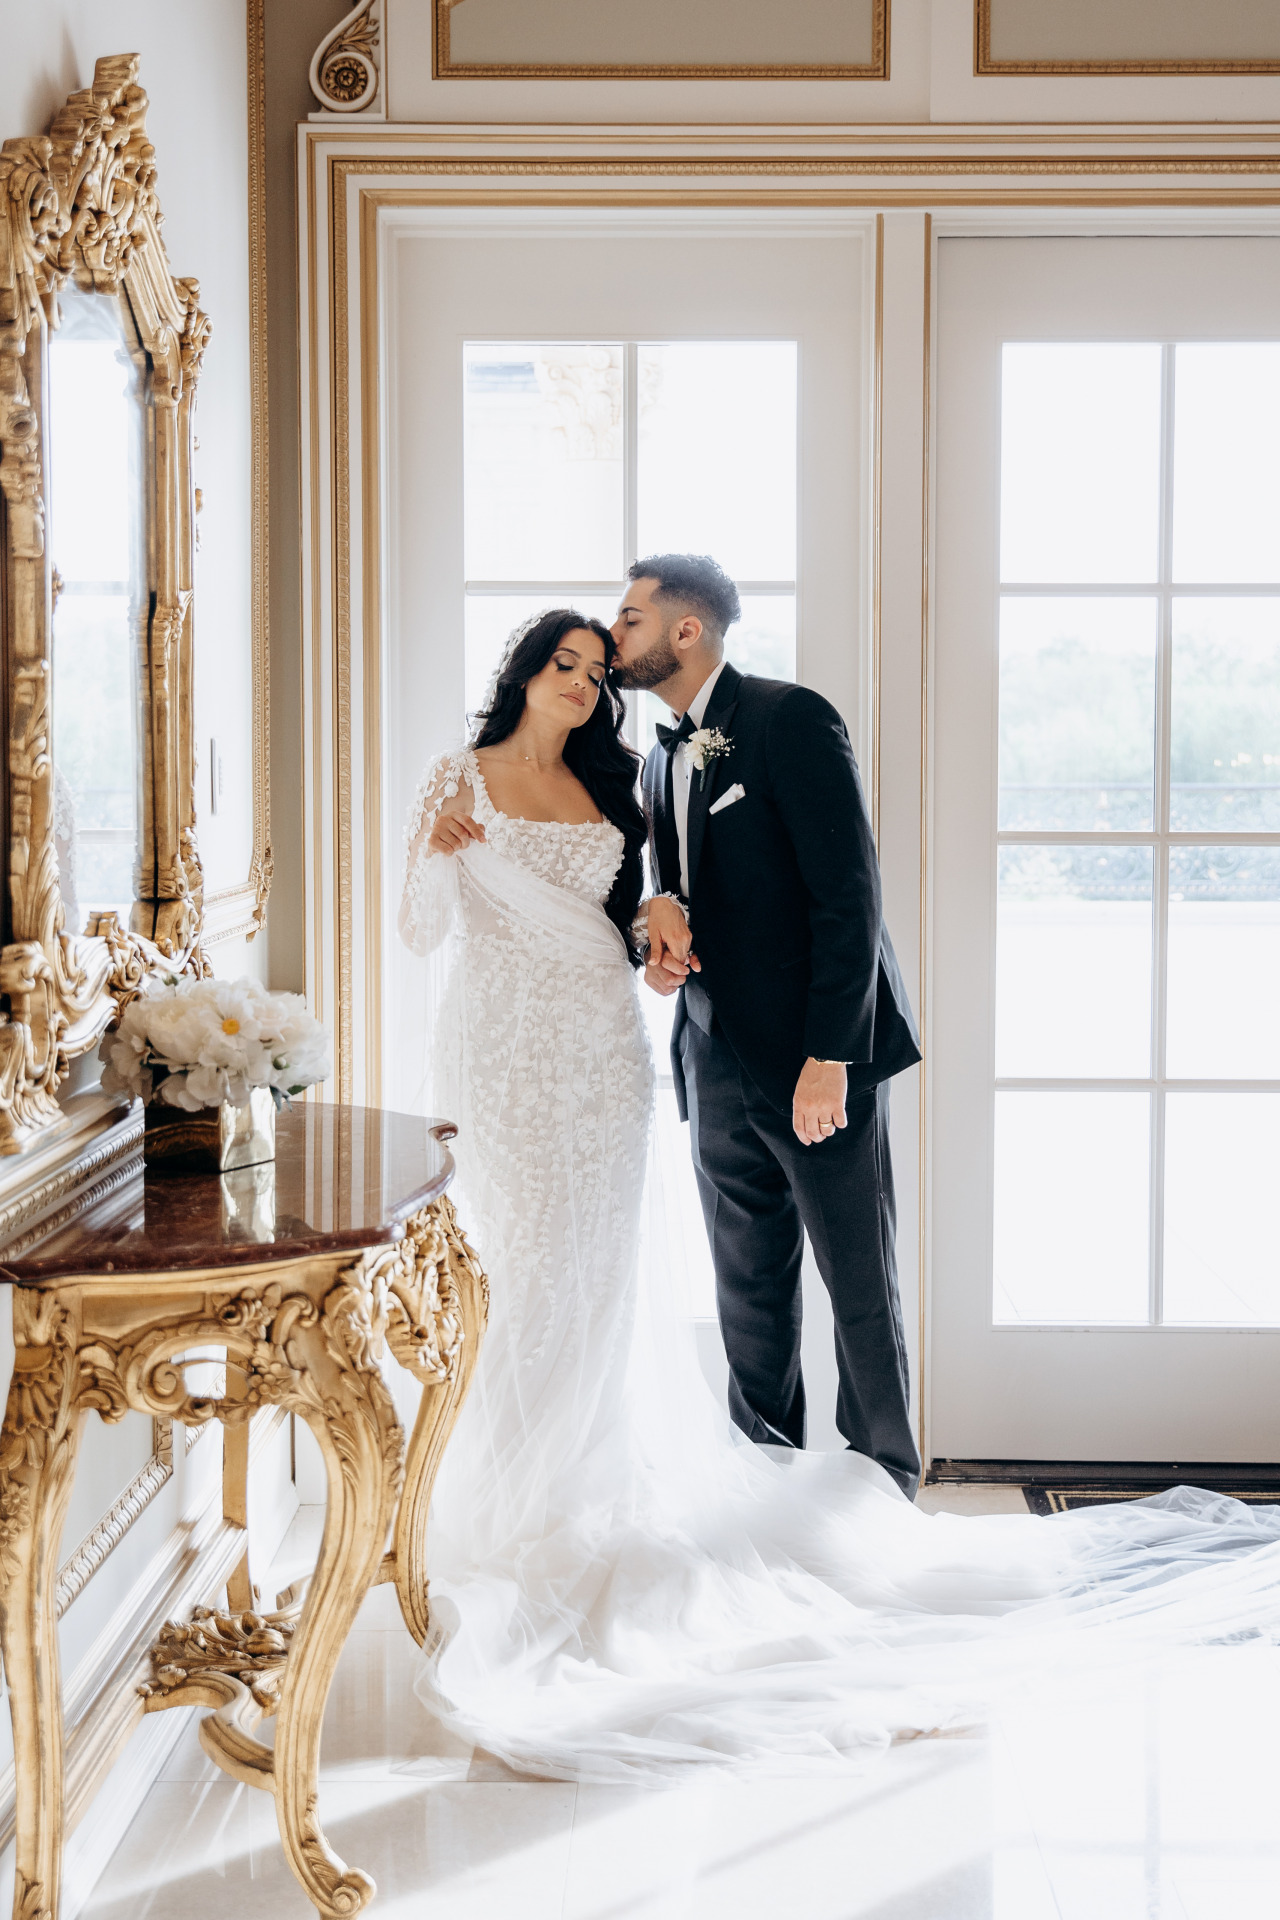 Egyprian coptic wedding editorial style in New Jersey 59